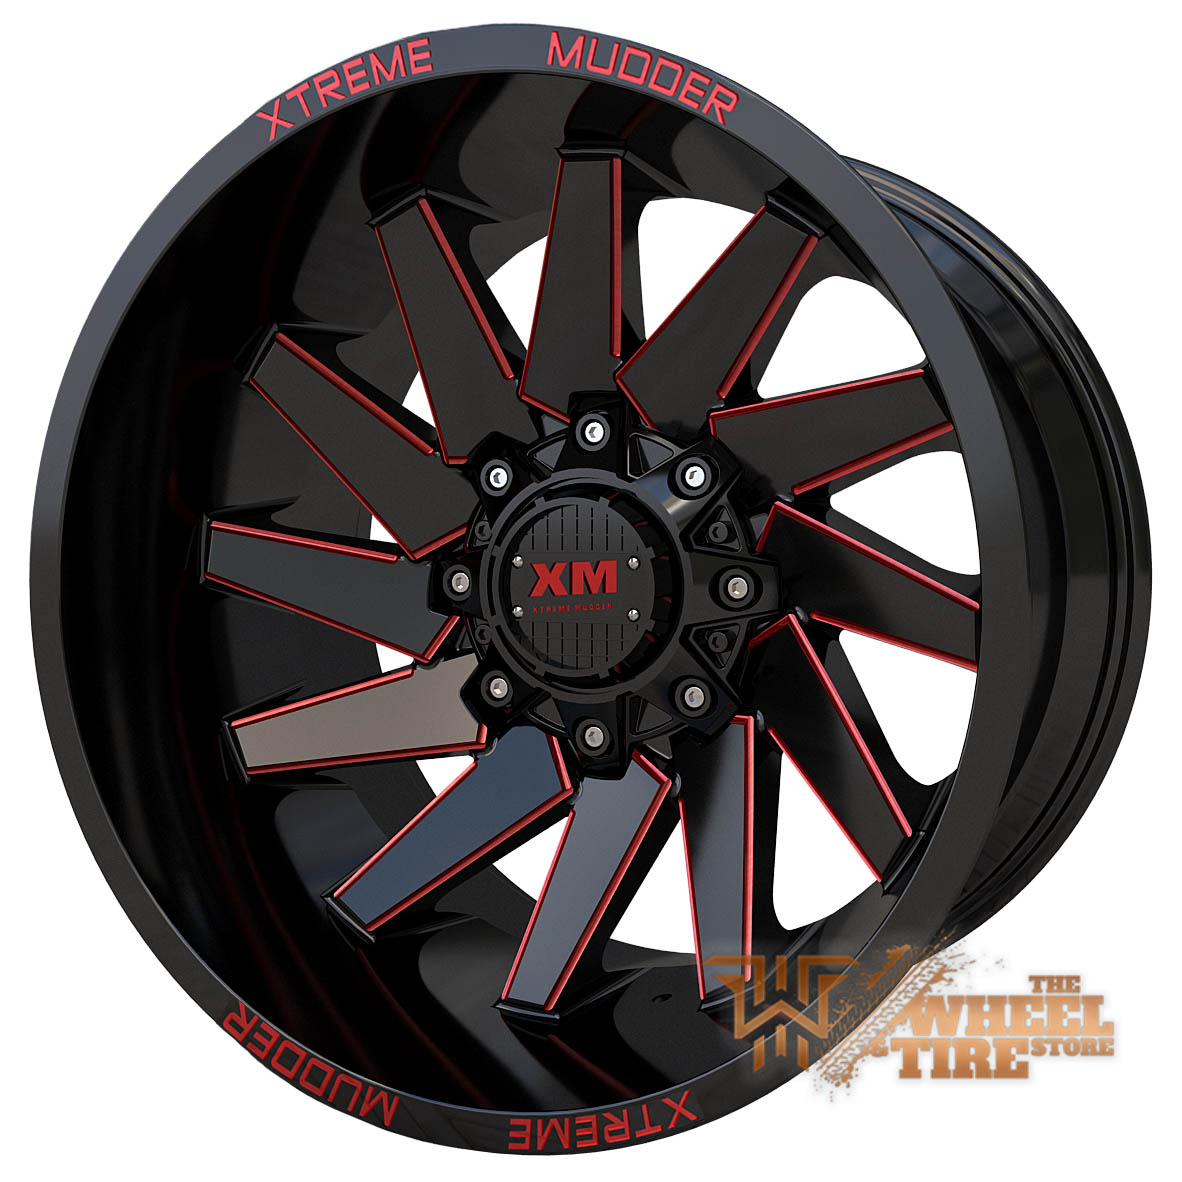 XTREME MUDDER XM-344 Wheel in Gloss Black Red Milled (Set of 4)